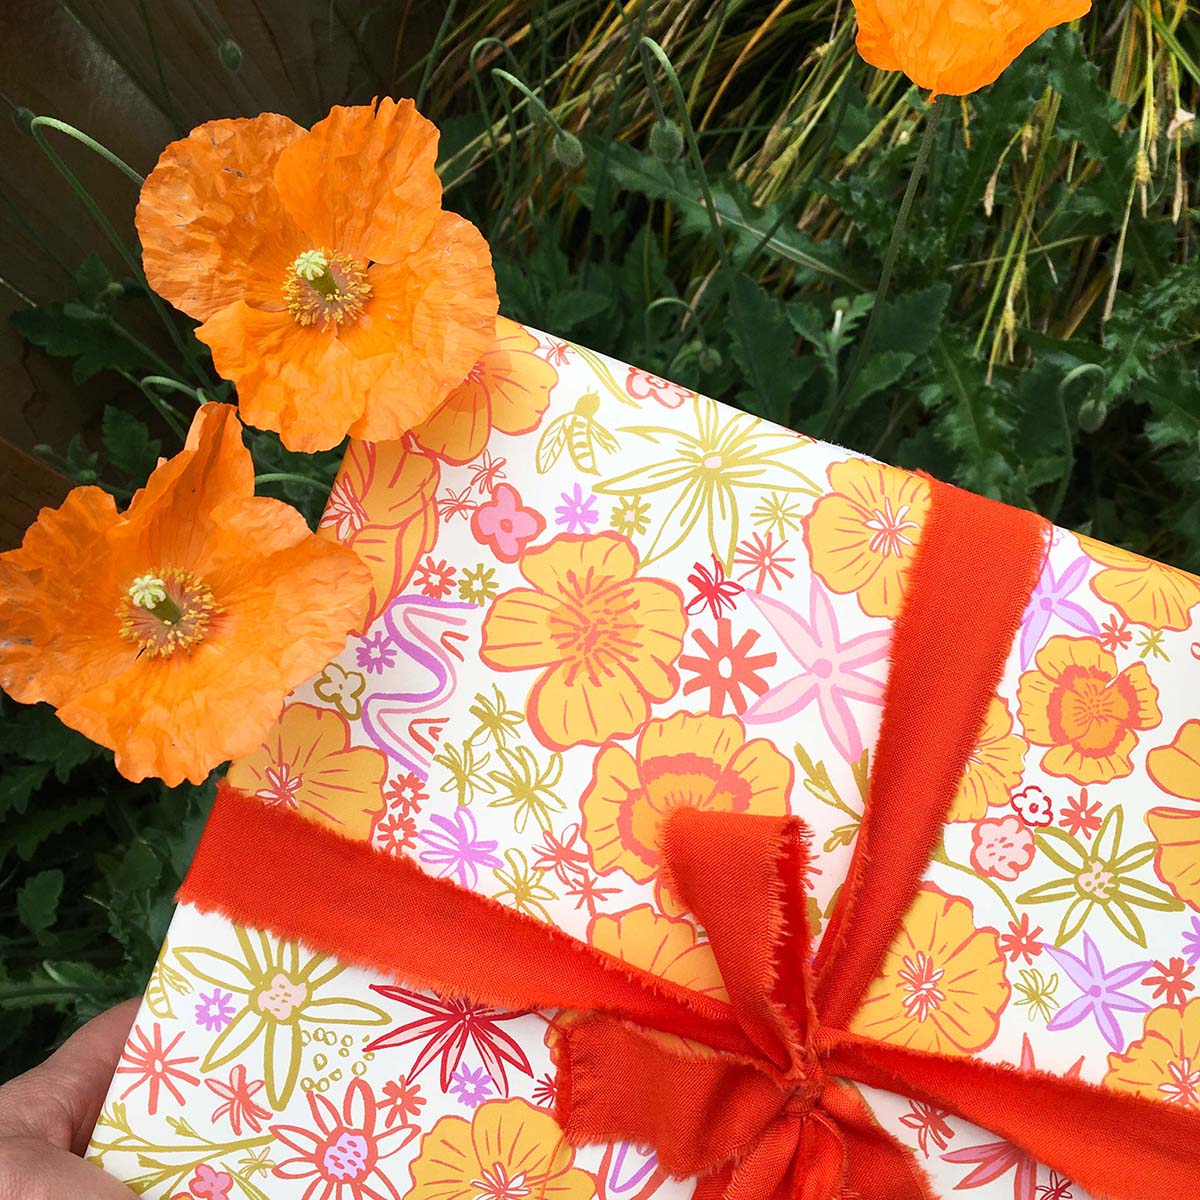 Wildflower Poppy Mix Gift Wrap-3 Sheets-Wholesale